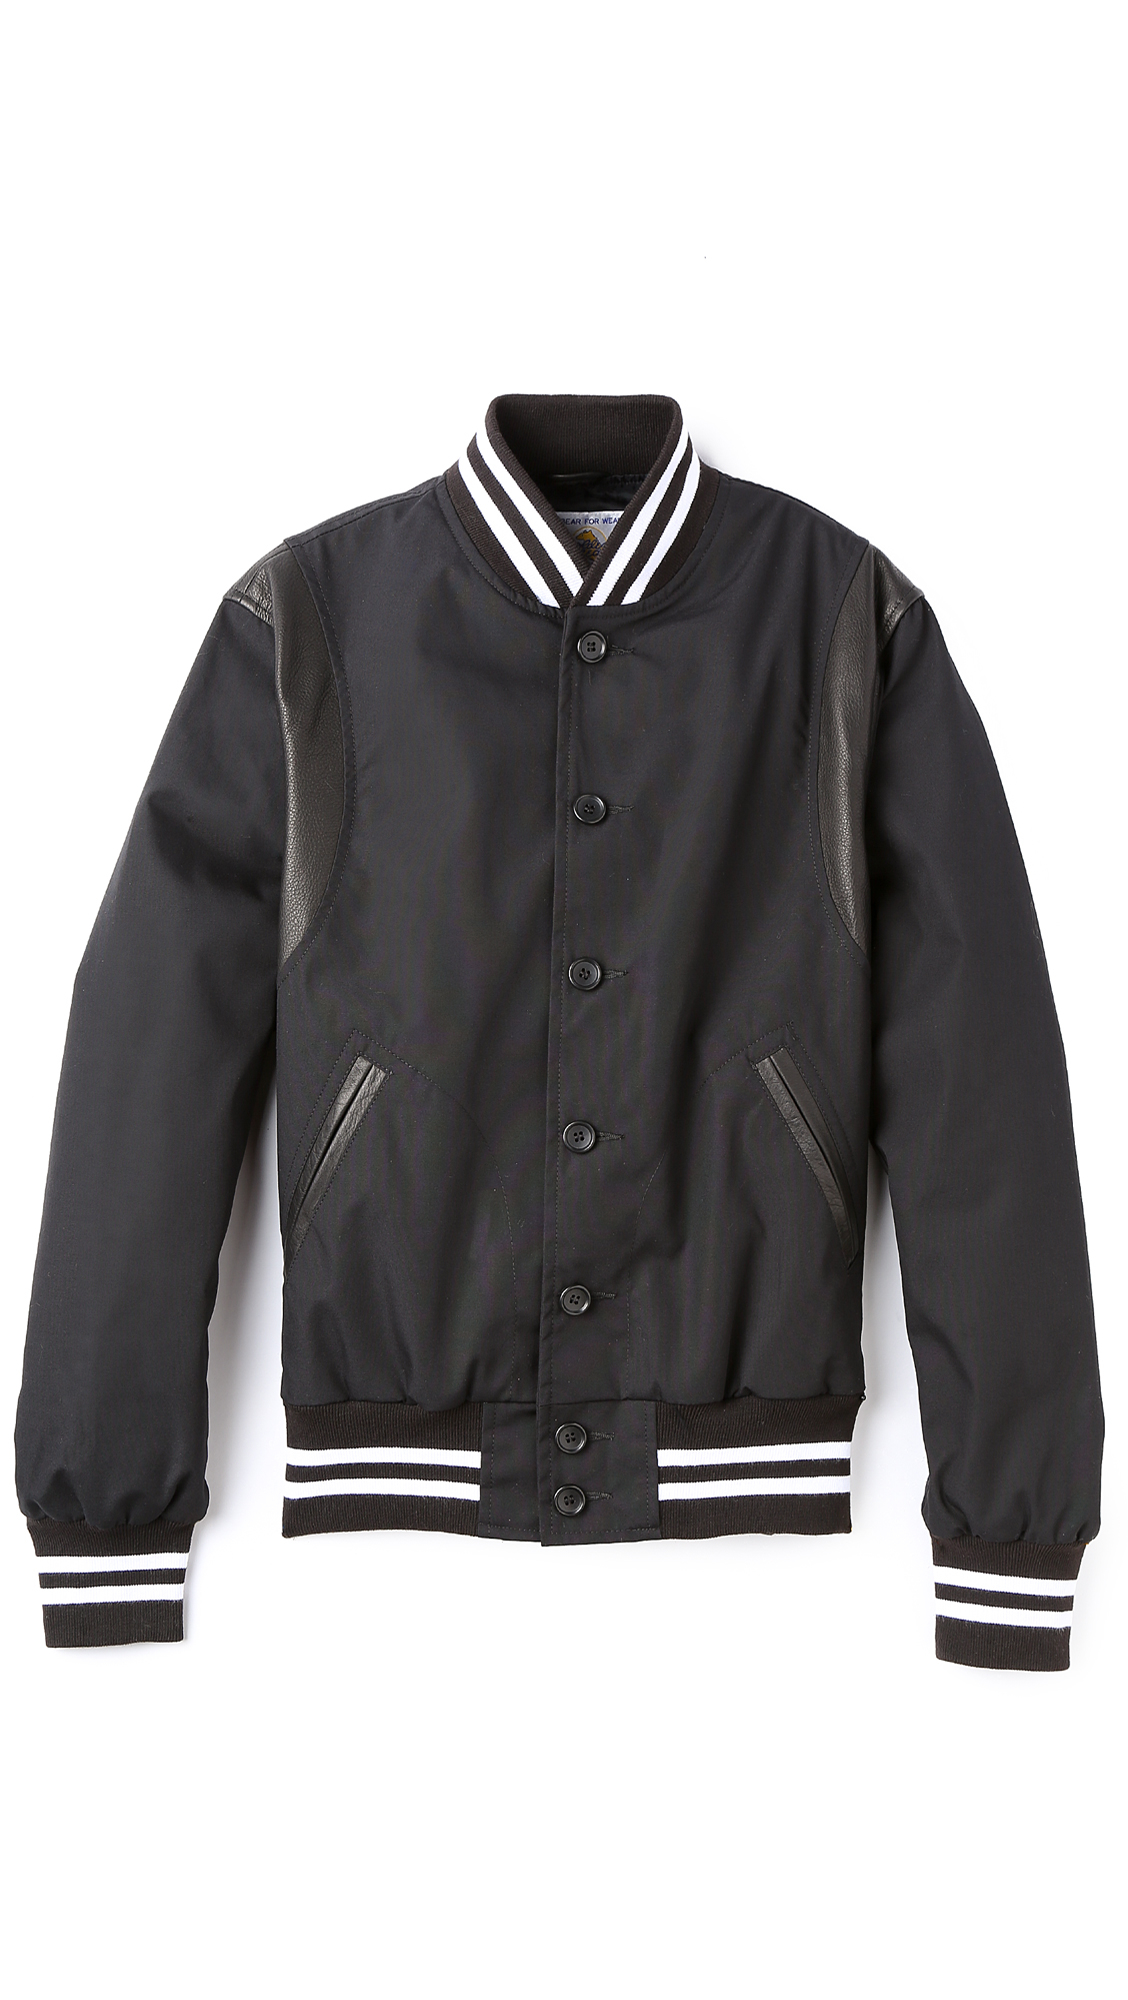 Lyst - Golden Bear Varsity Jacket With Armhole Inserts in Black for Men